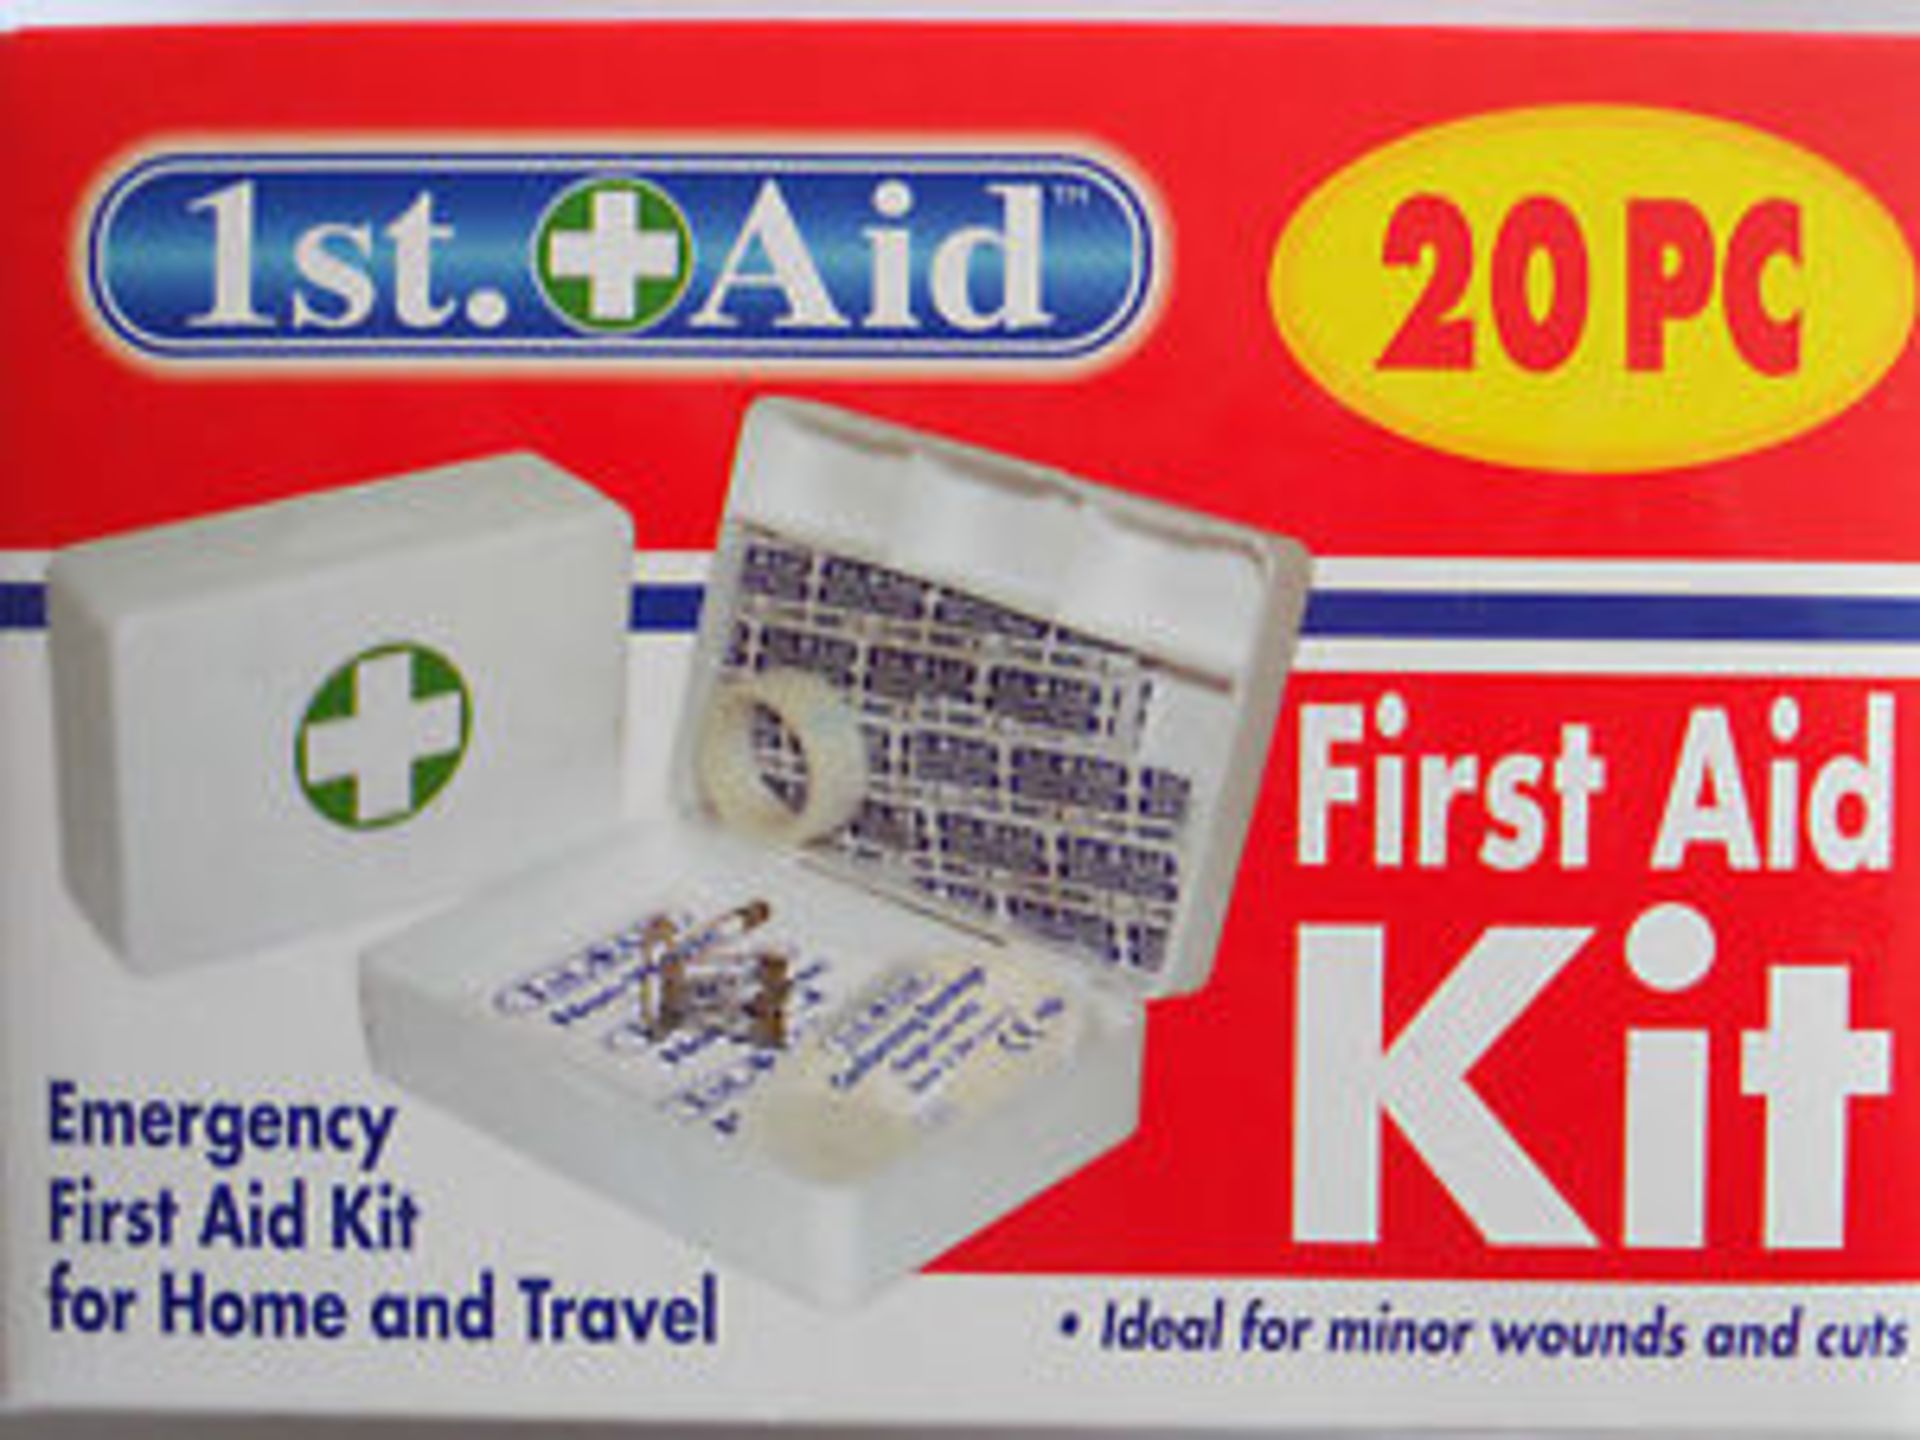 V Brand New Six 20pc First Aid Kits In Plastic Case X 2 YOUR BID PRICE TO BE MULTIPLIED BY TWO